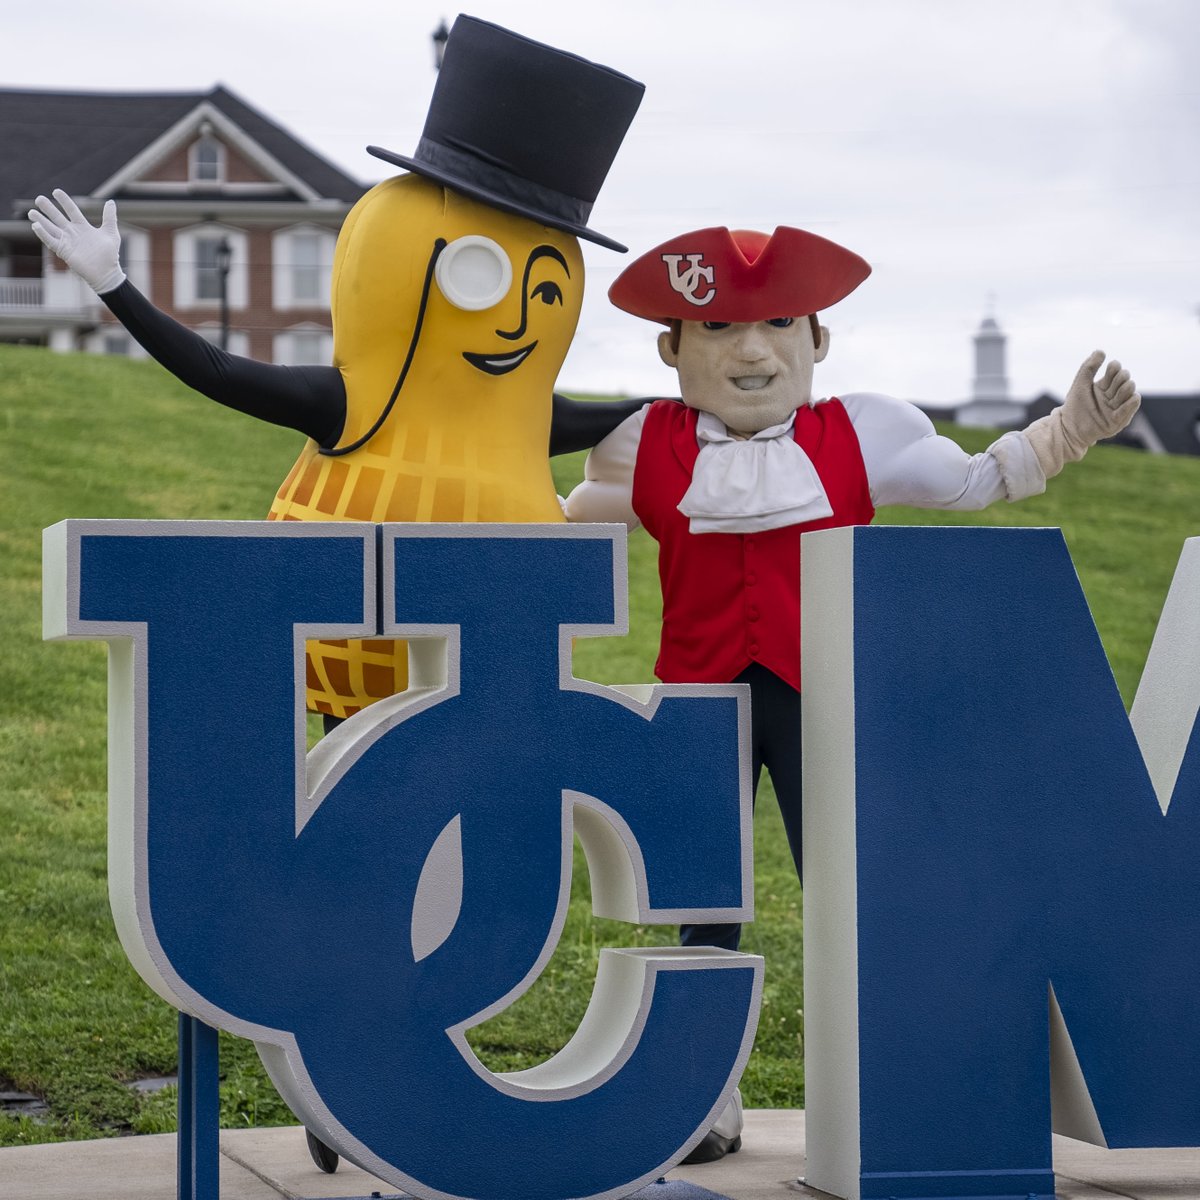 Pete had a shell of a good time with his new friend Mr. Peanut as @NUTmobile_Tour stopped by Cumberlands campus in their search for the next peanutter. #ucumberlands #nutmobile #mrpeanut